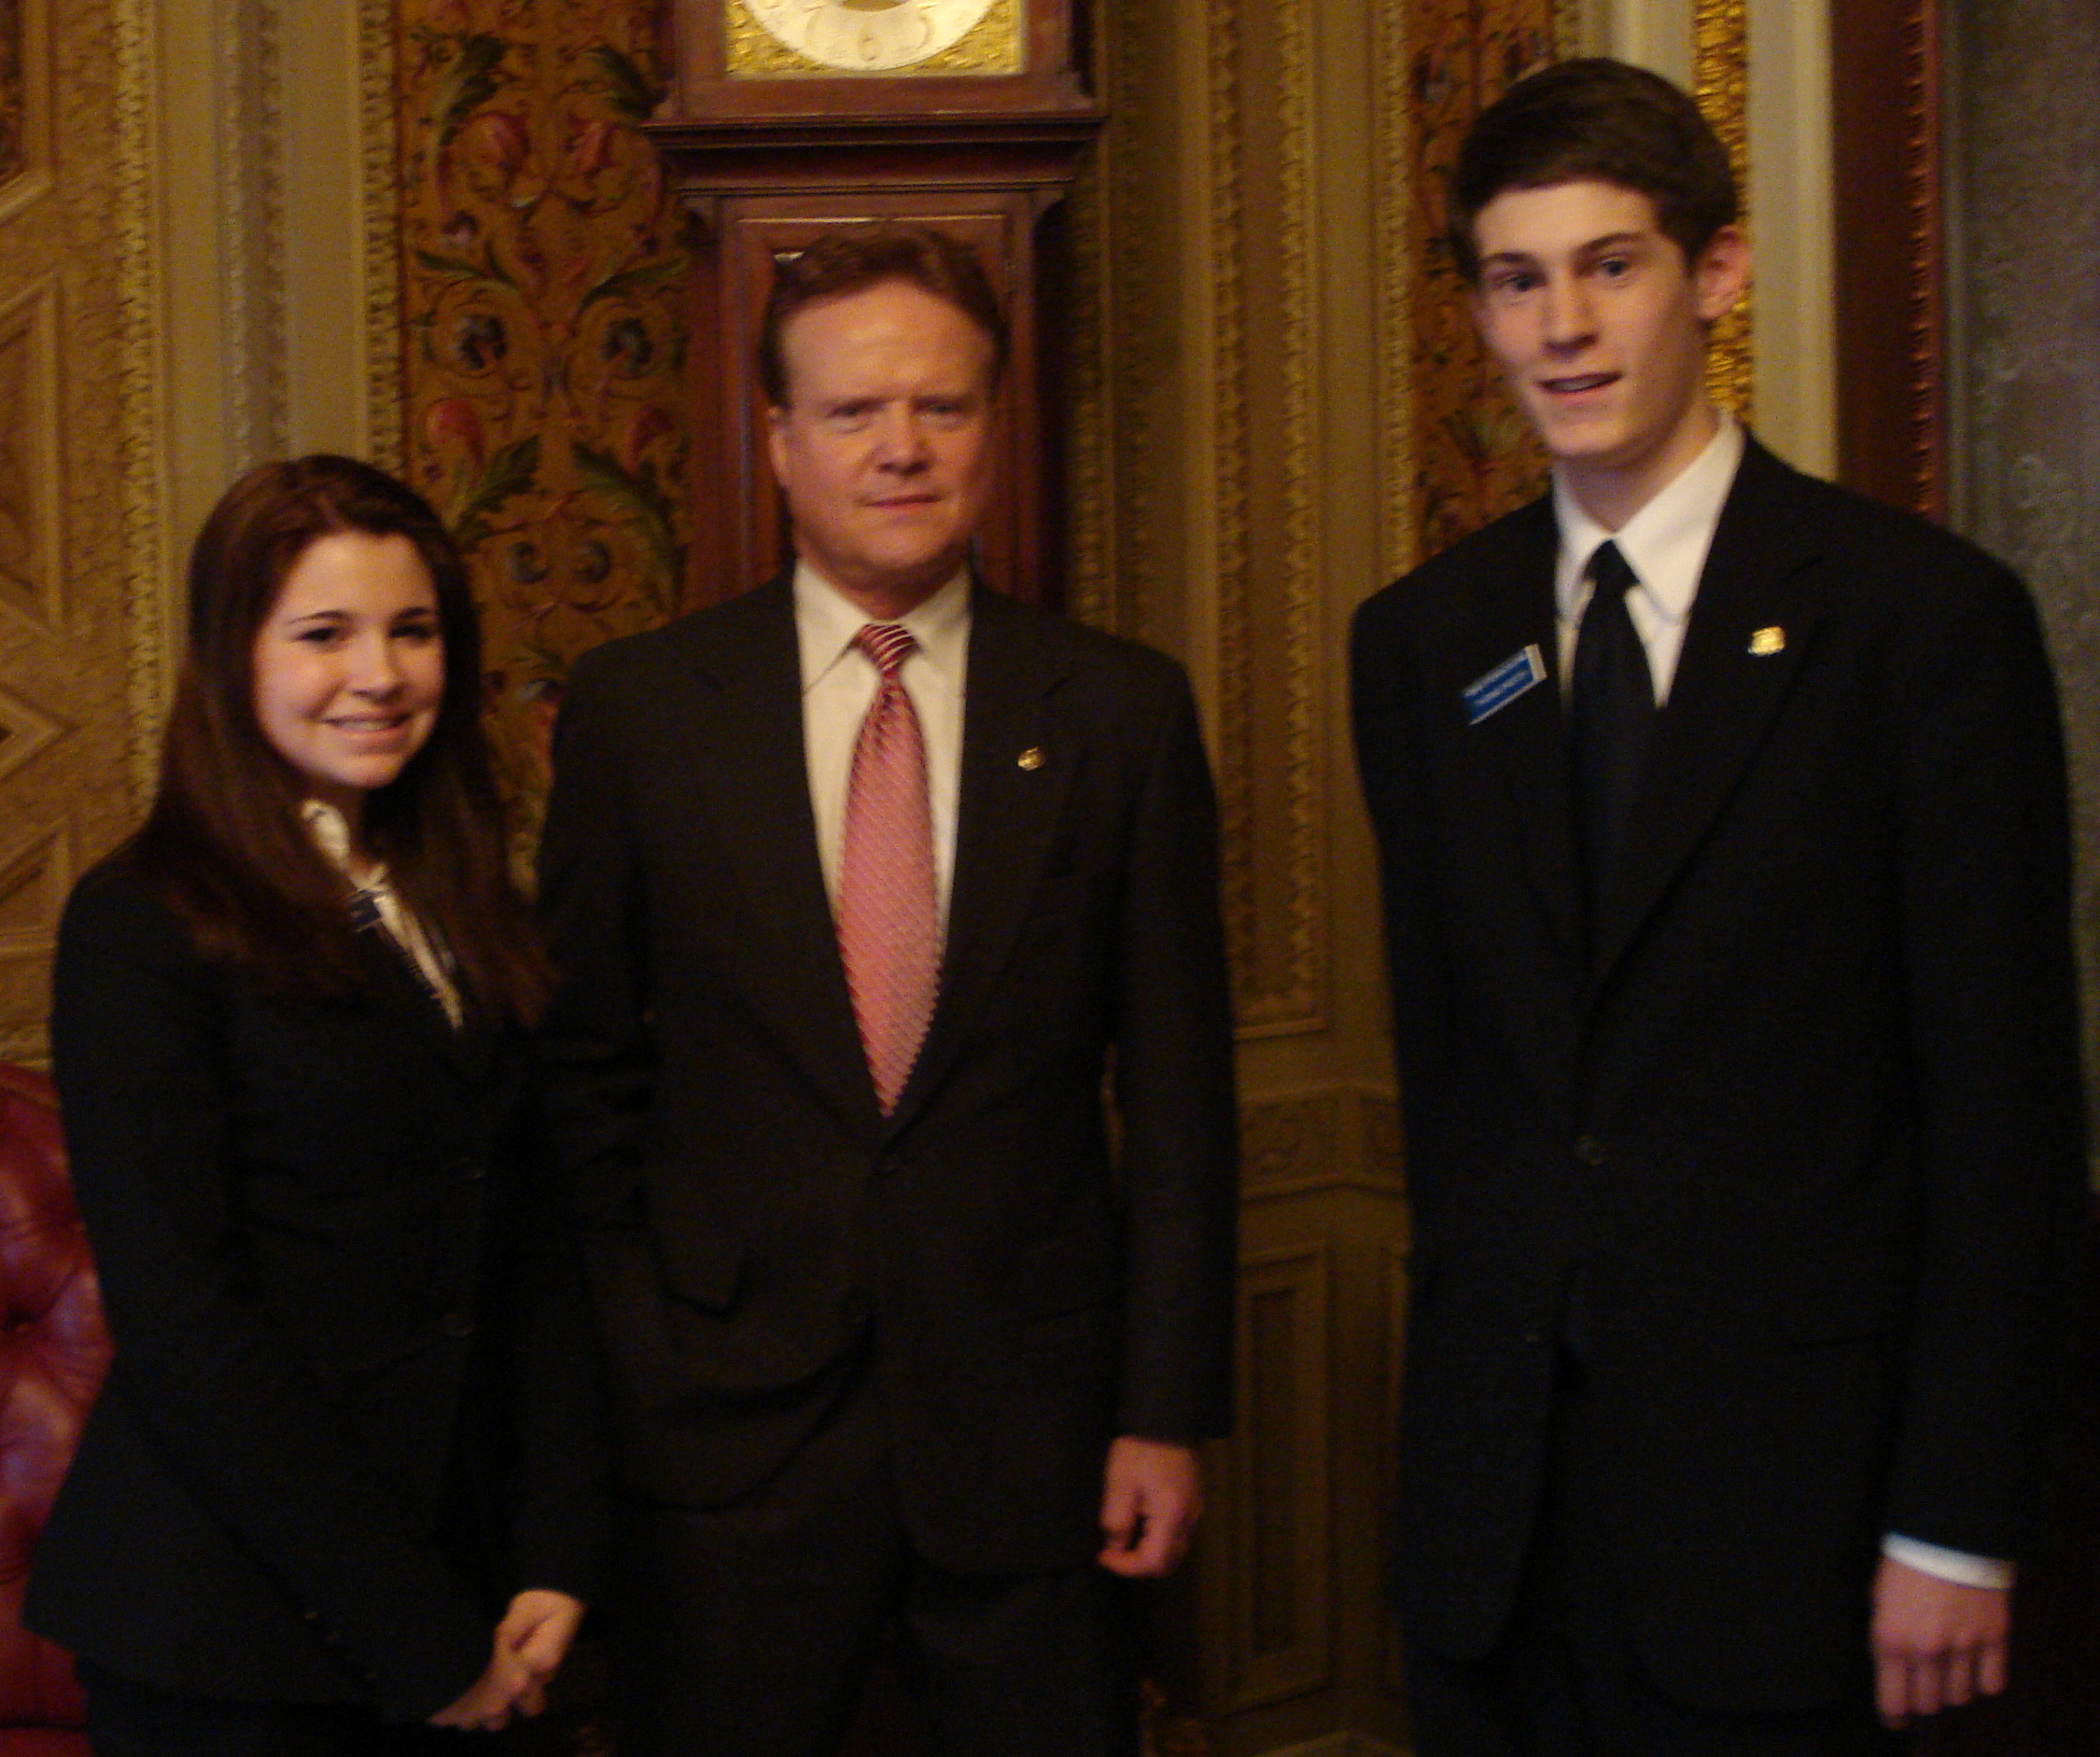 Senator Webb meets with pages from the Senate Page Program